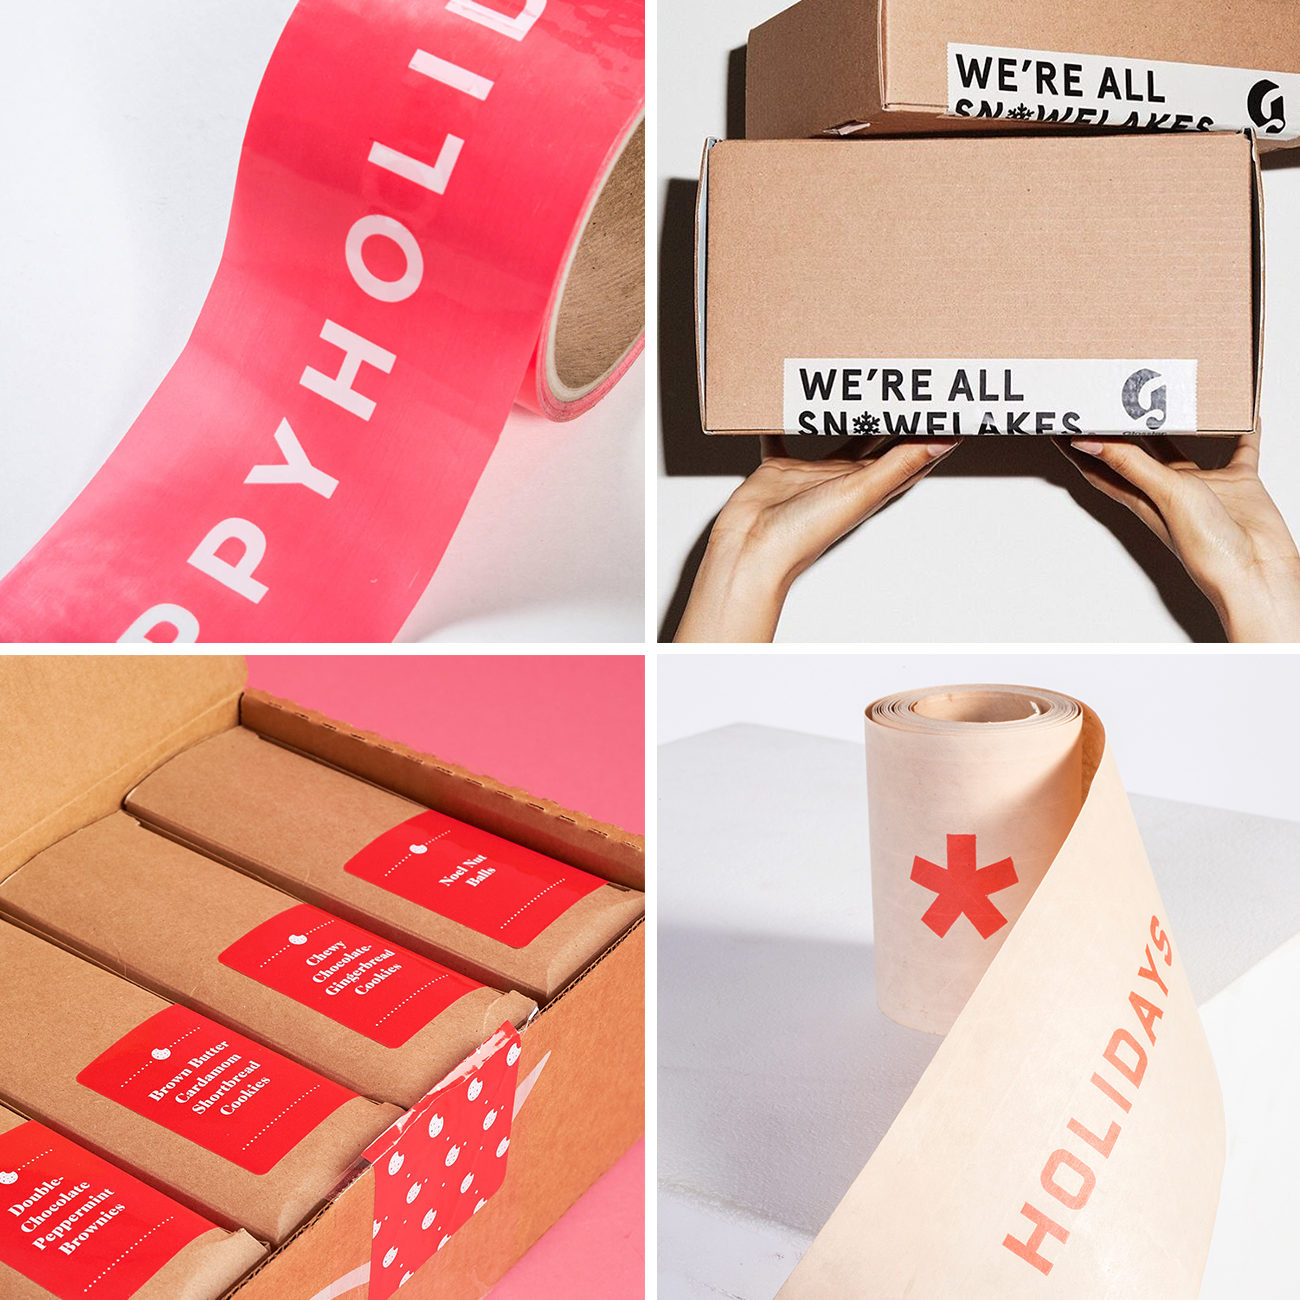 Photos via: Lumi, Glossier, My Subscription Addiction 90 Ideas to Spruce Up Your Holiday Packaging Design